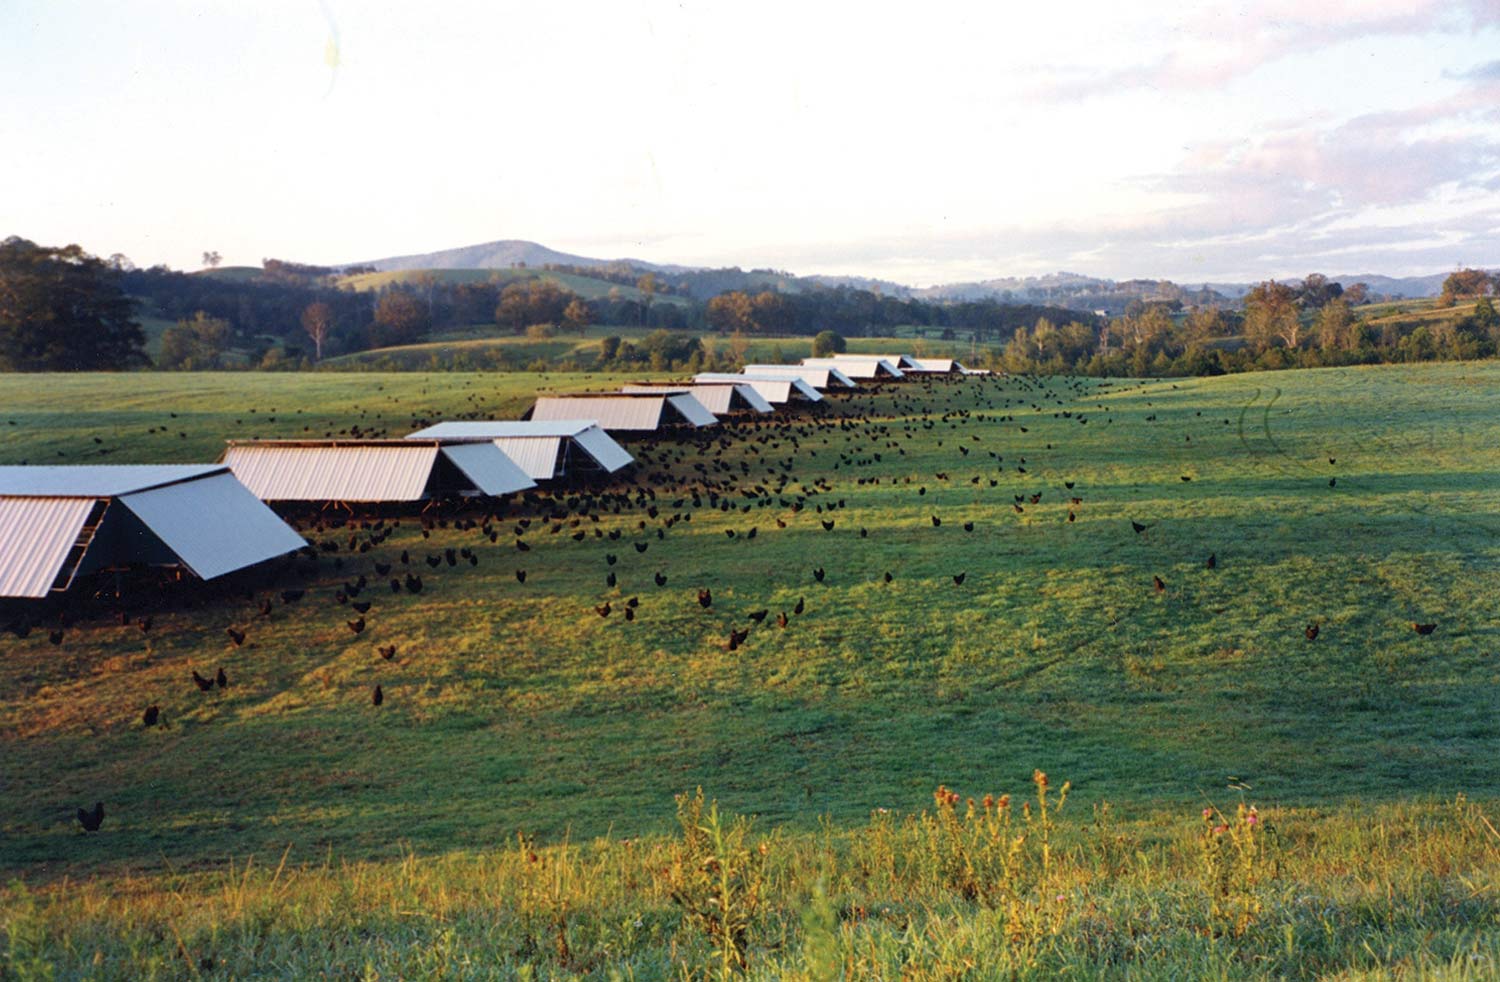 One shed turned to many in the 1990s